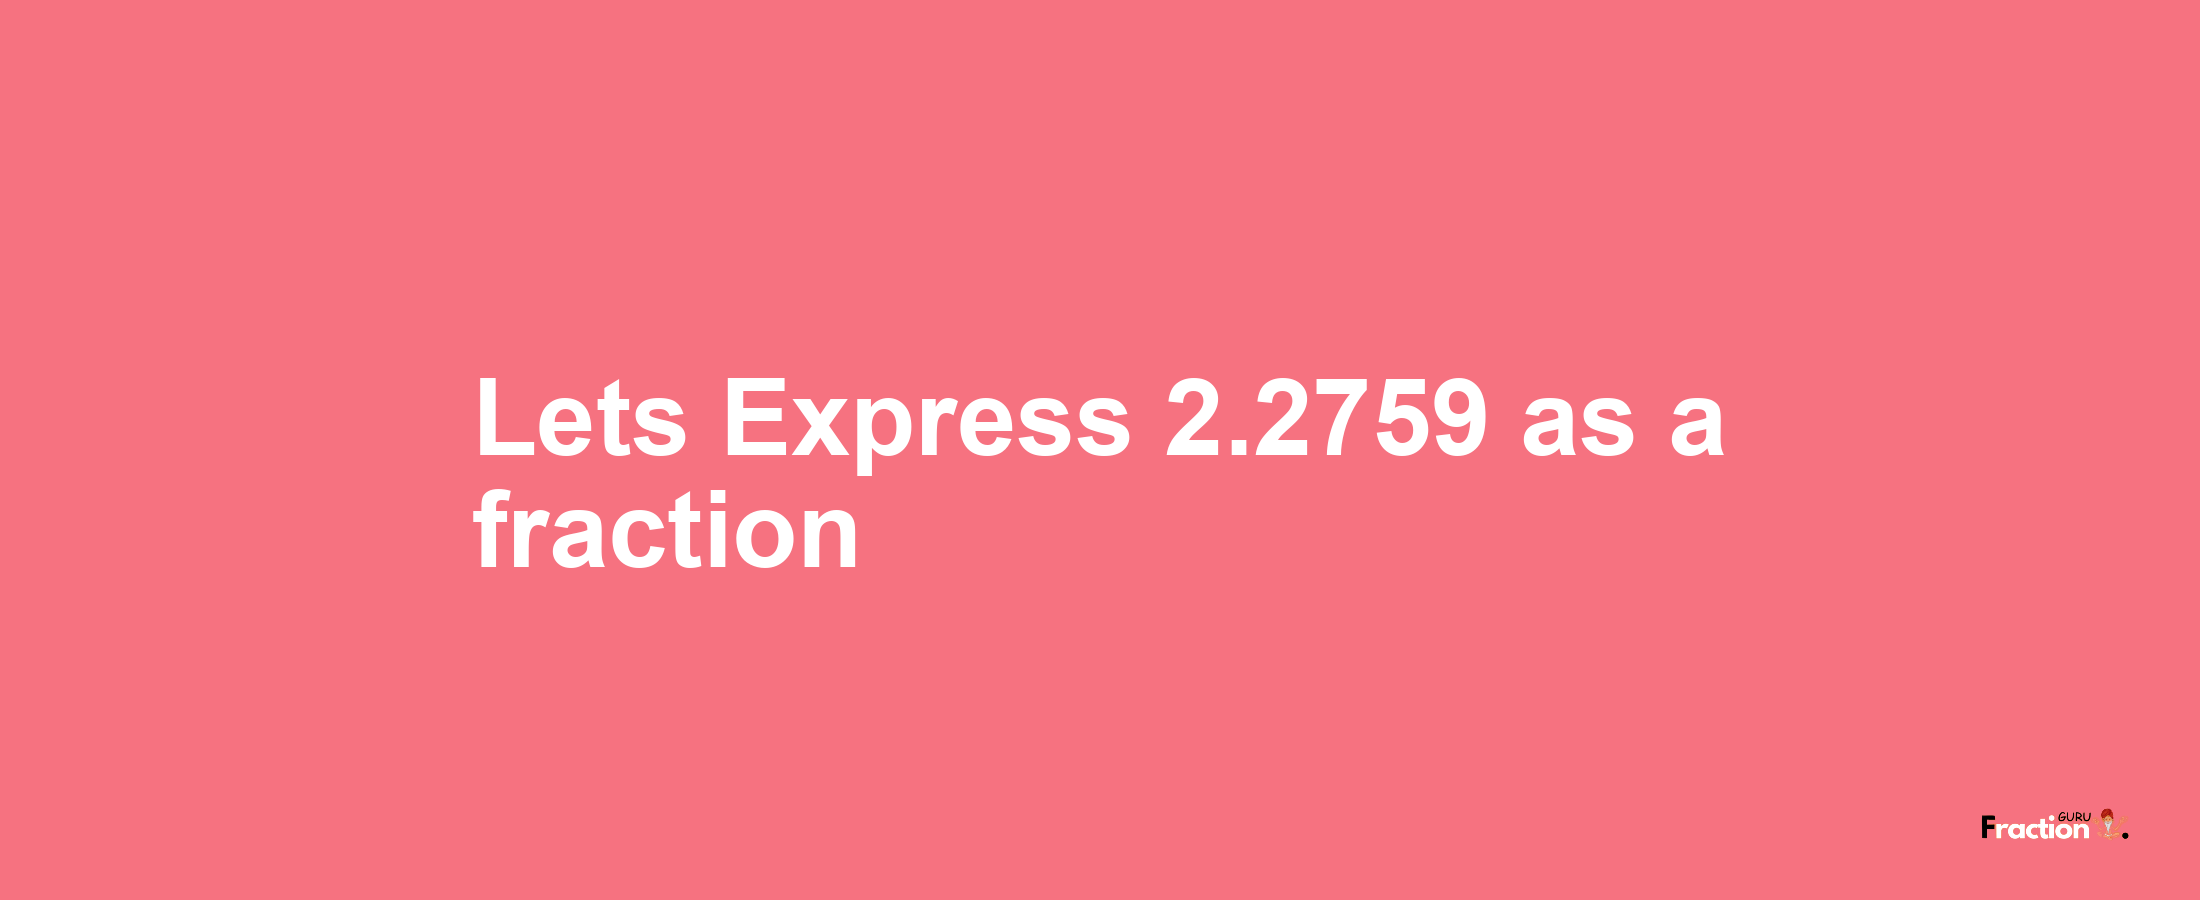 Lets Express 2.2759 as afraction